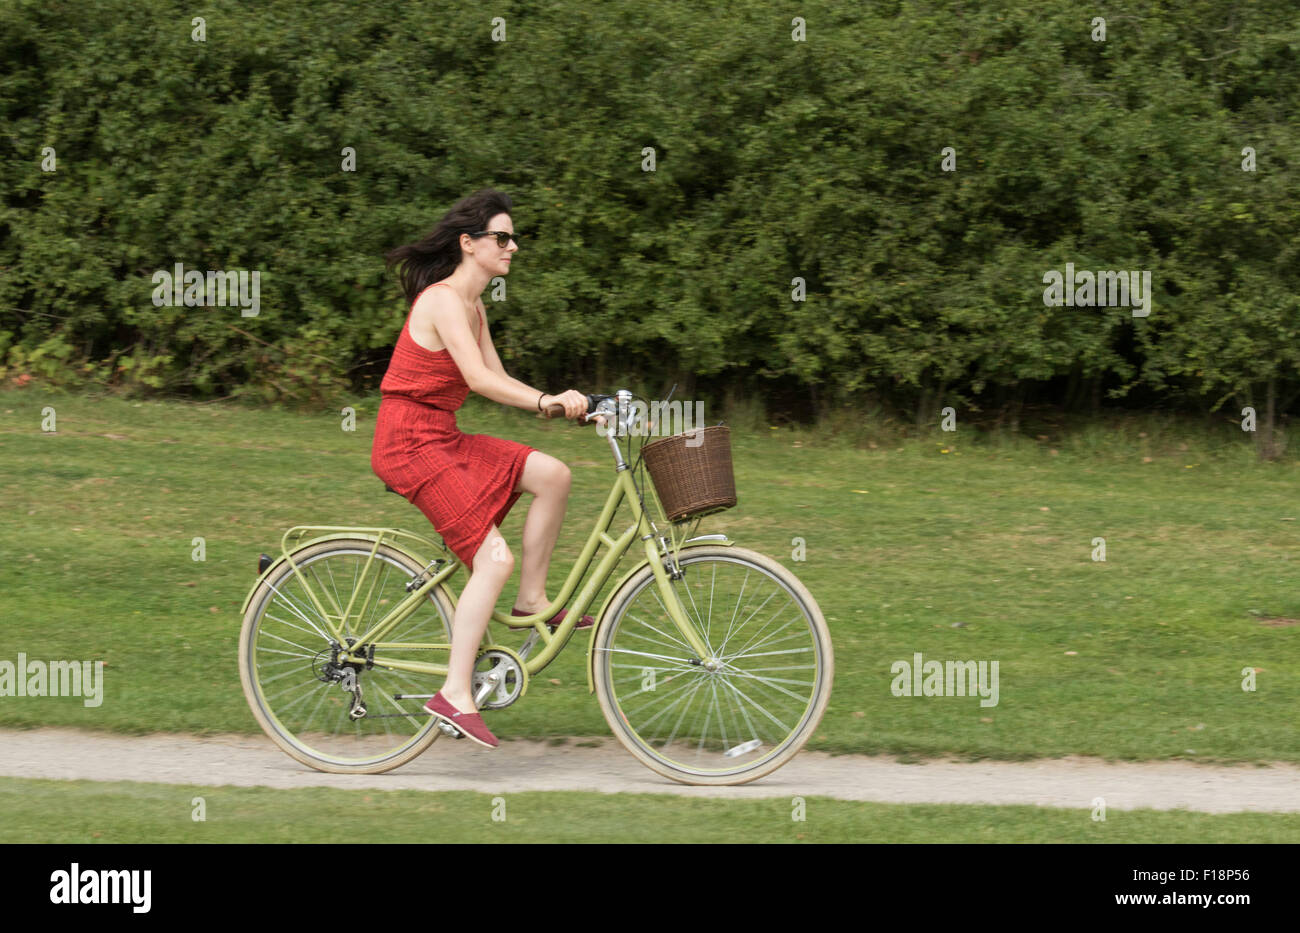 Lady in a red dress cycling on a cycle path, England, UK Stock Photo